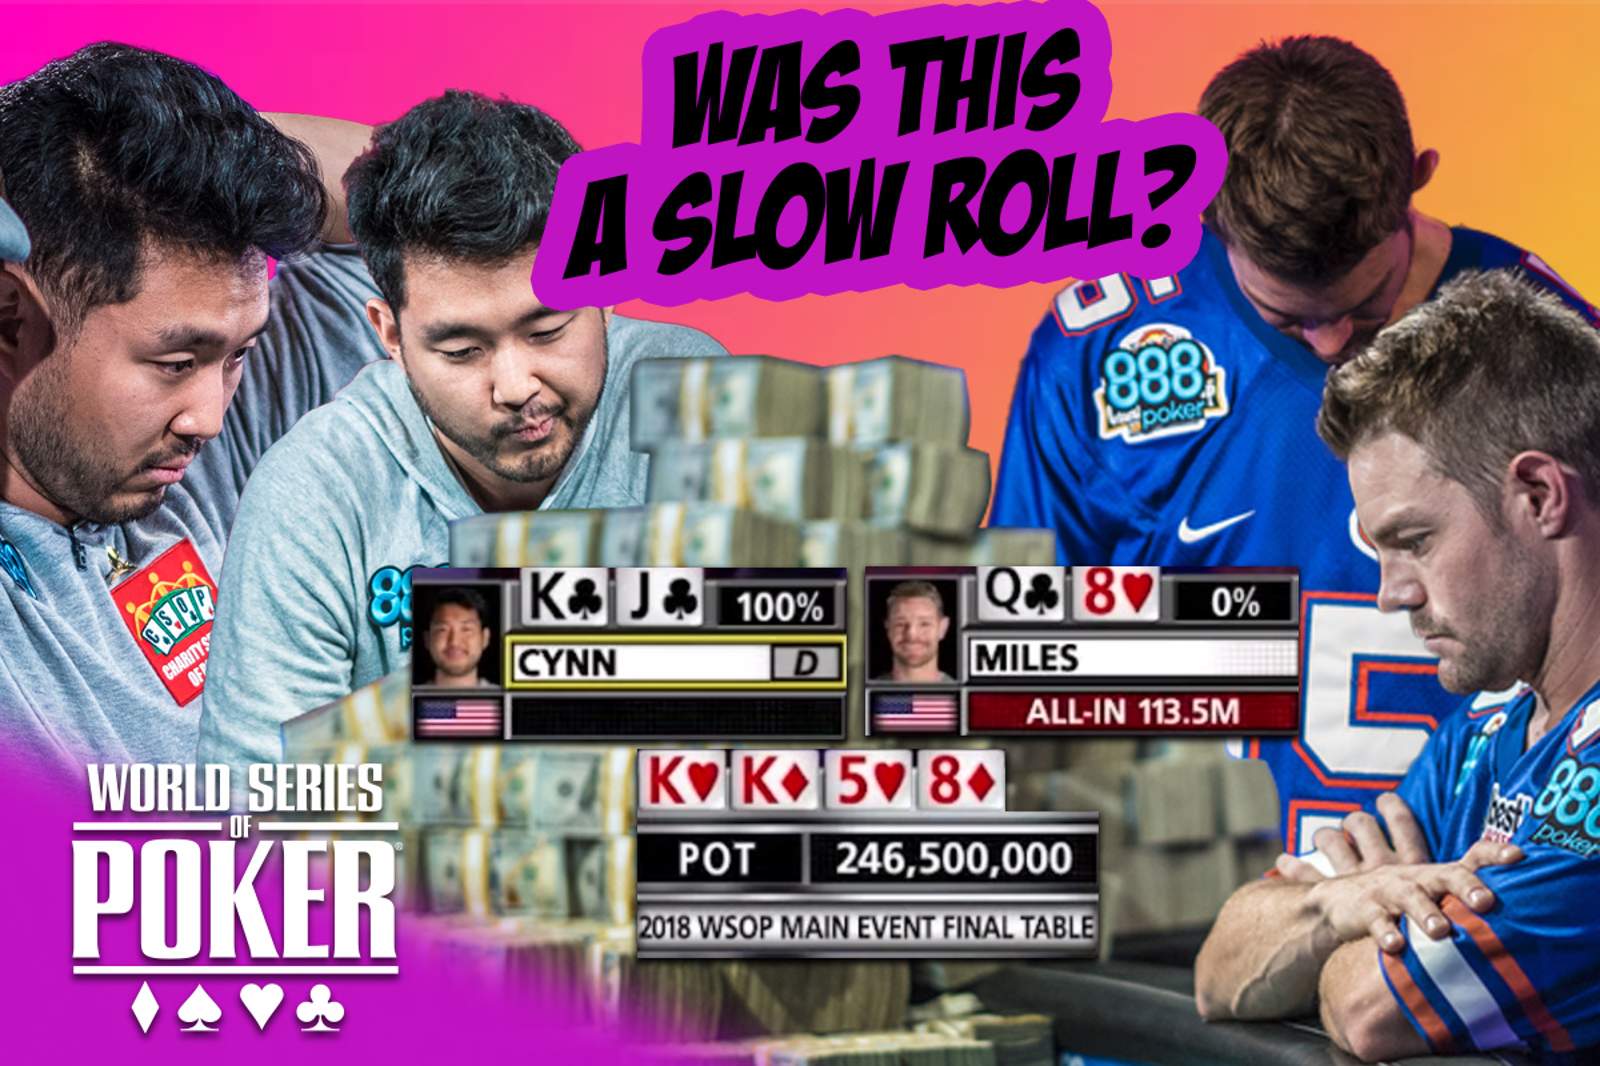 Did John Cynn Slow Roll Tony Miles on the Final Hand of the 2018 WSOP Main Event?